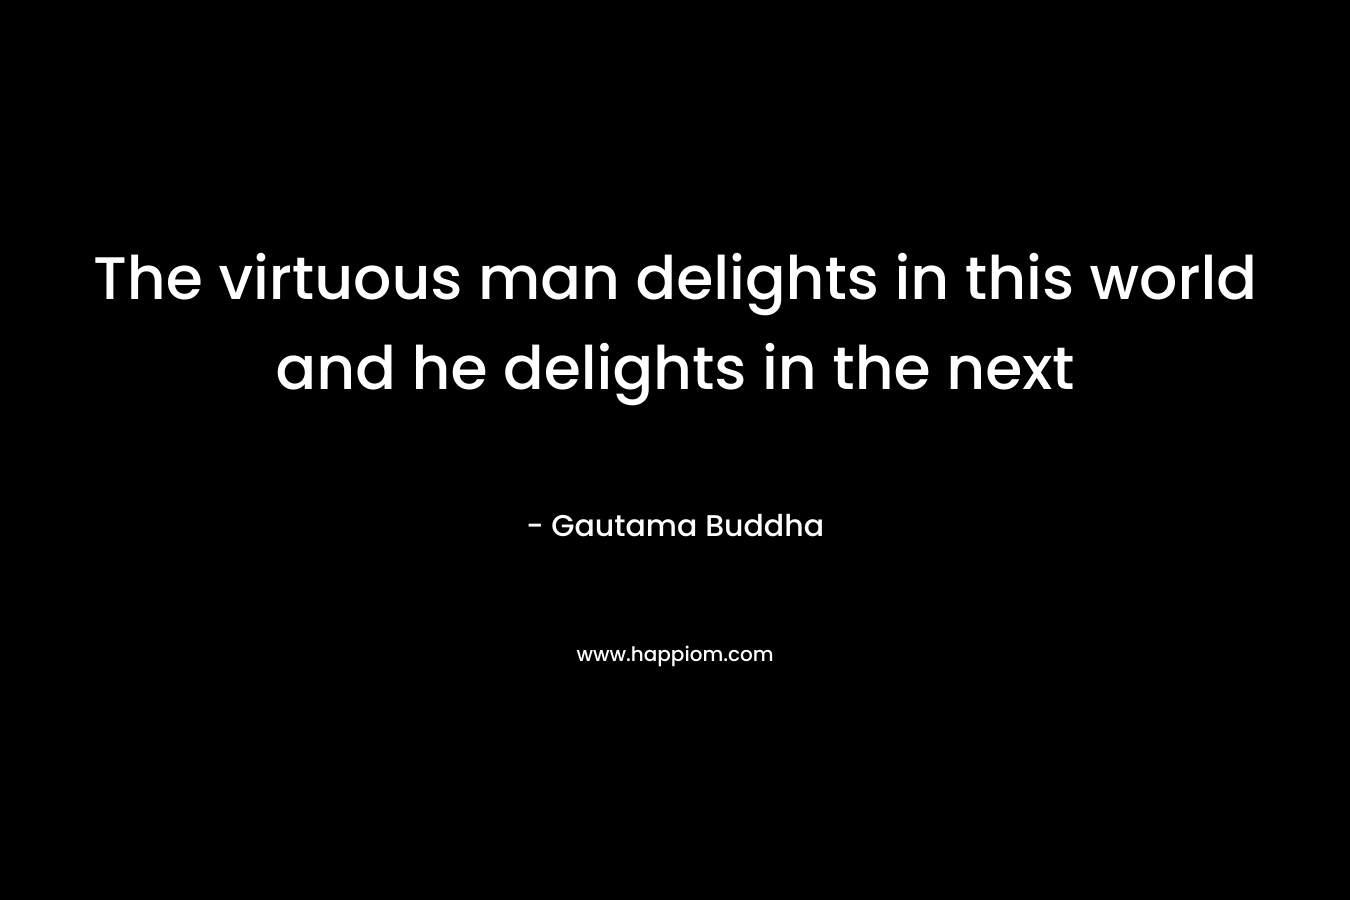 The virtuous man delights in this world and he delights in the next